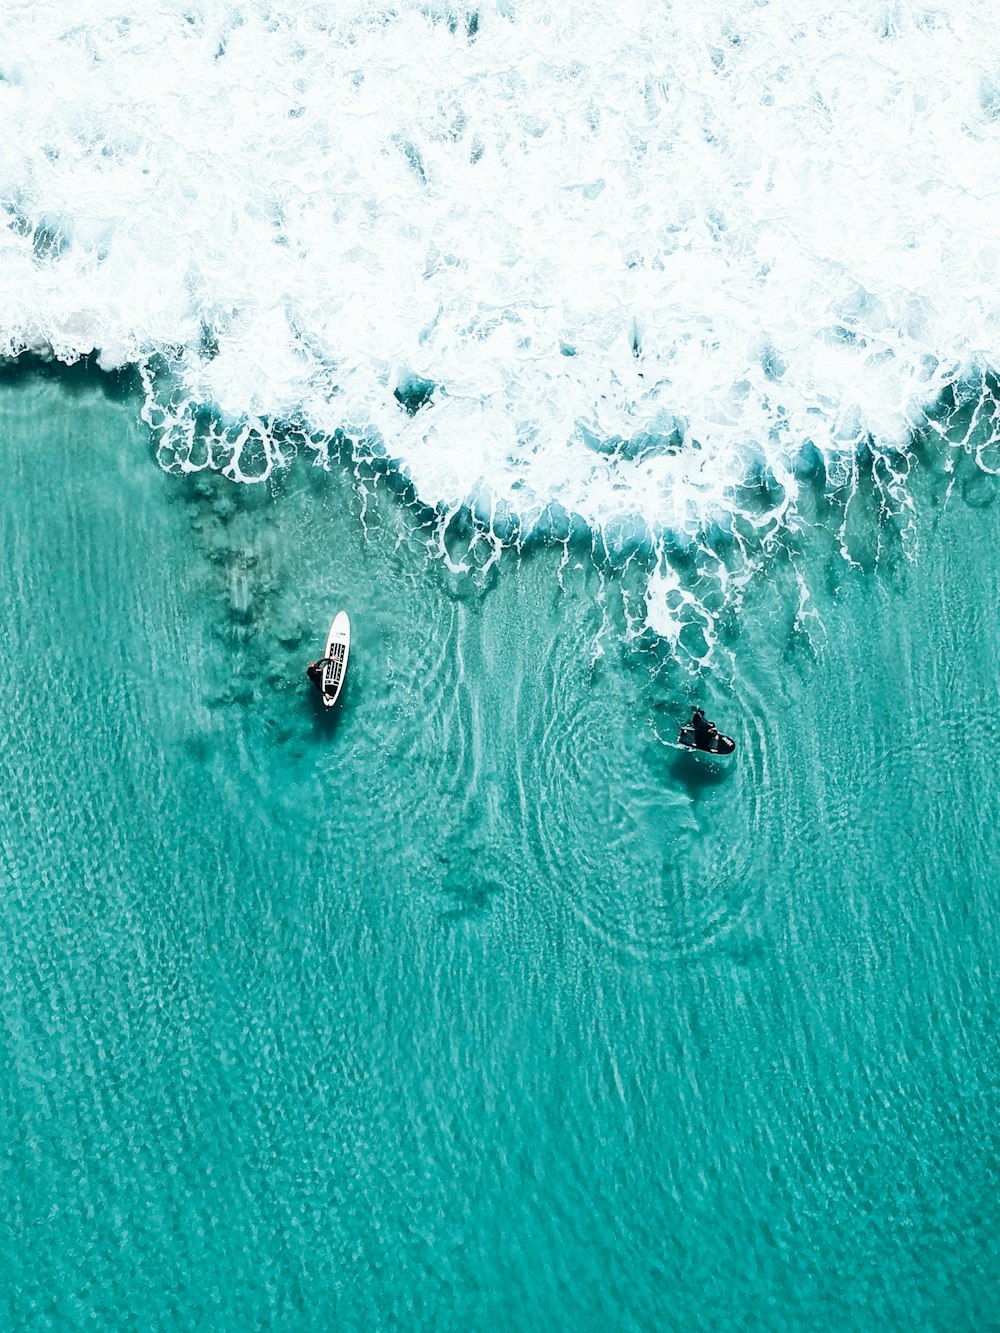 aerial view of person surfing on sea waves during daytime